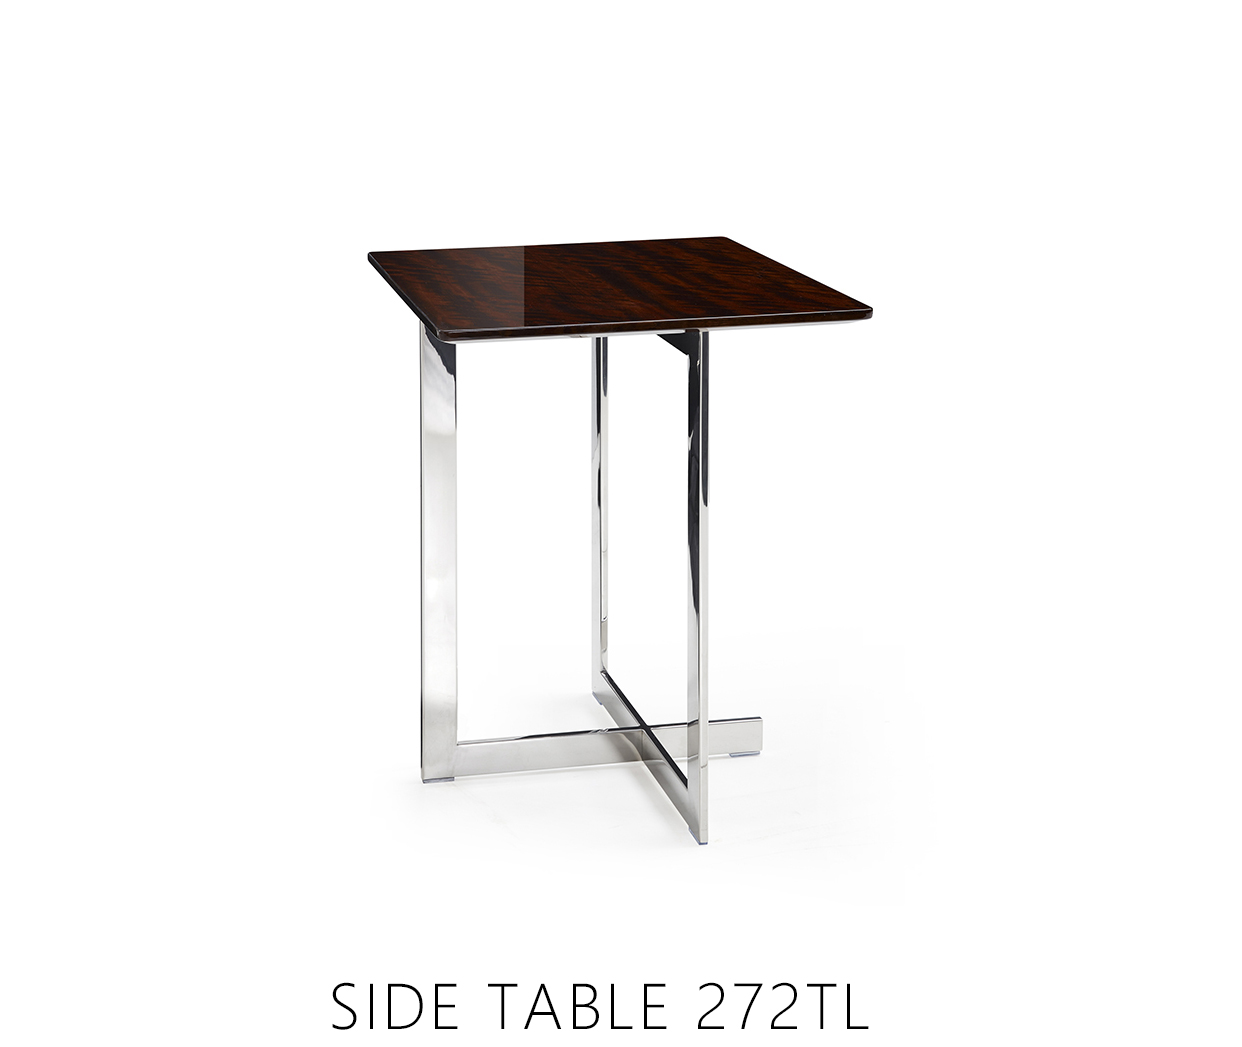 SIDE TABLE 272TL